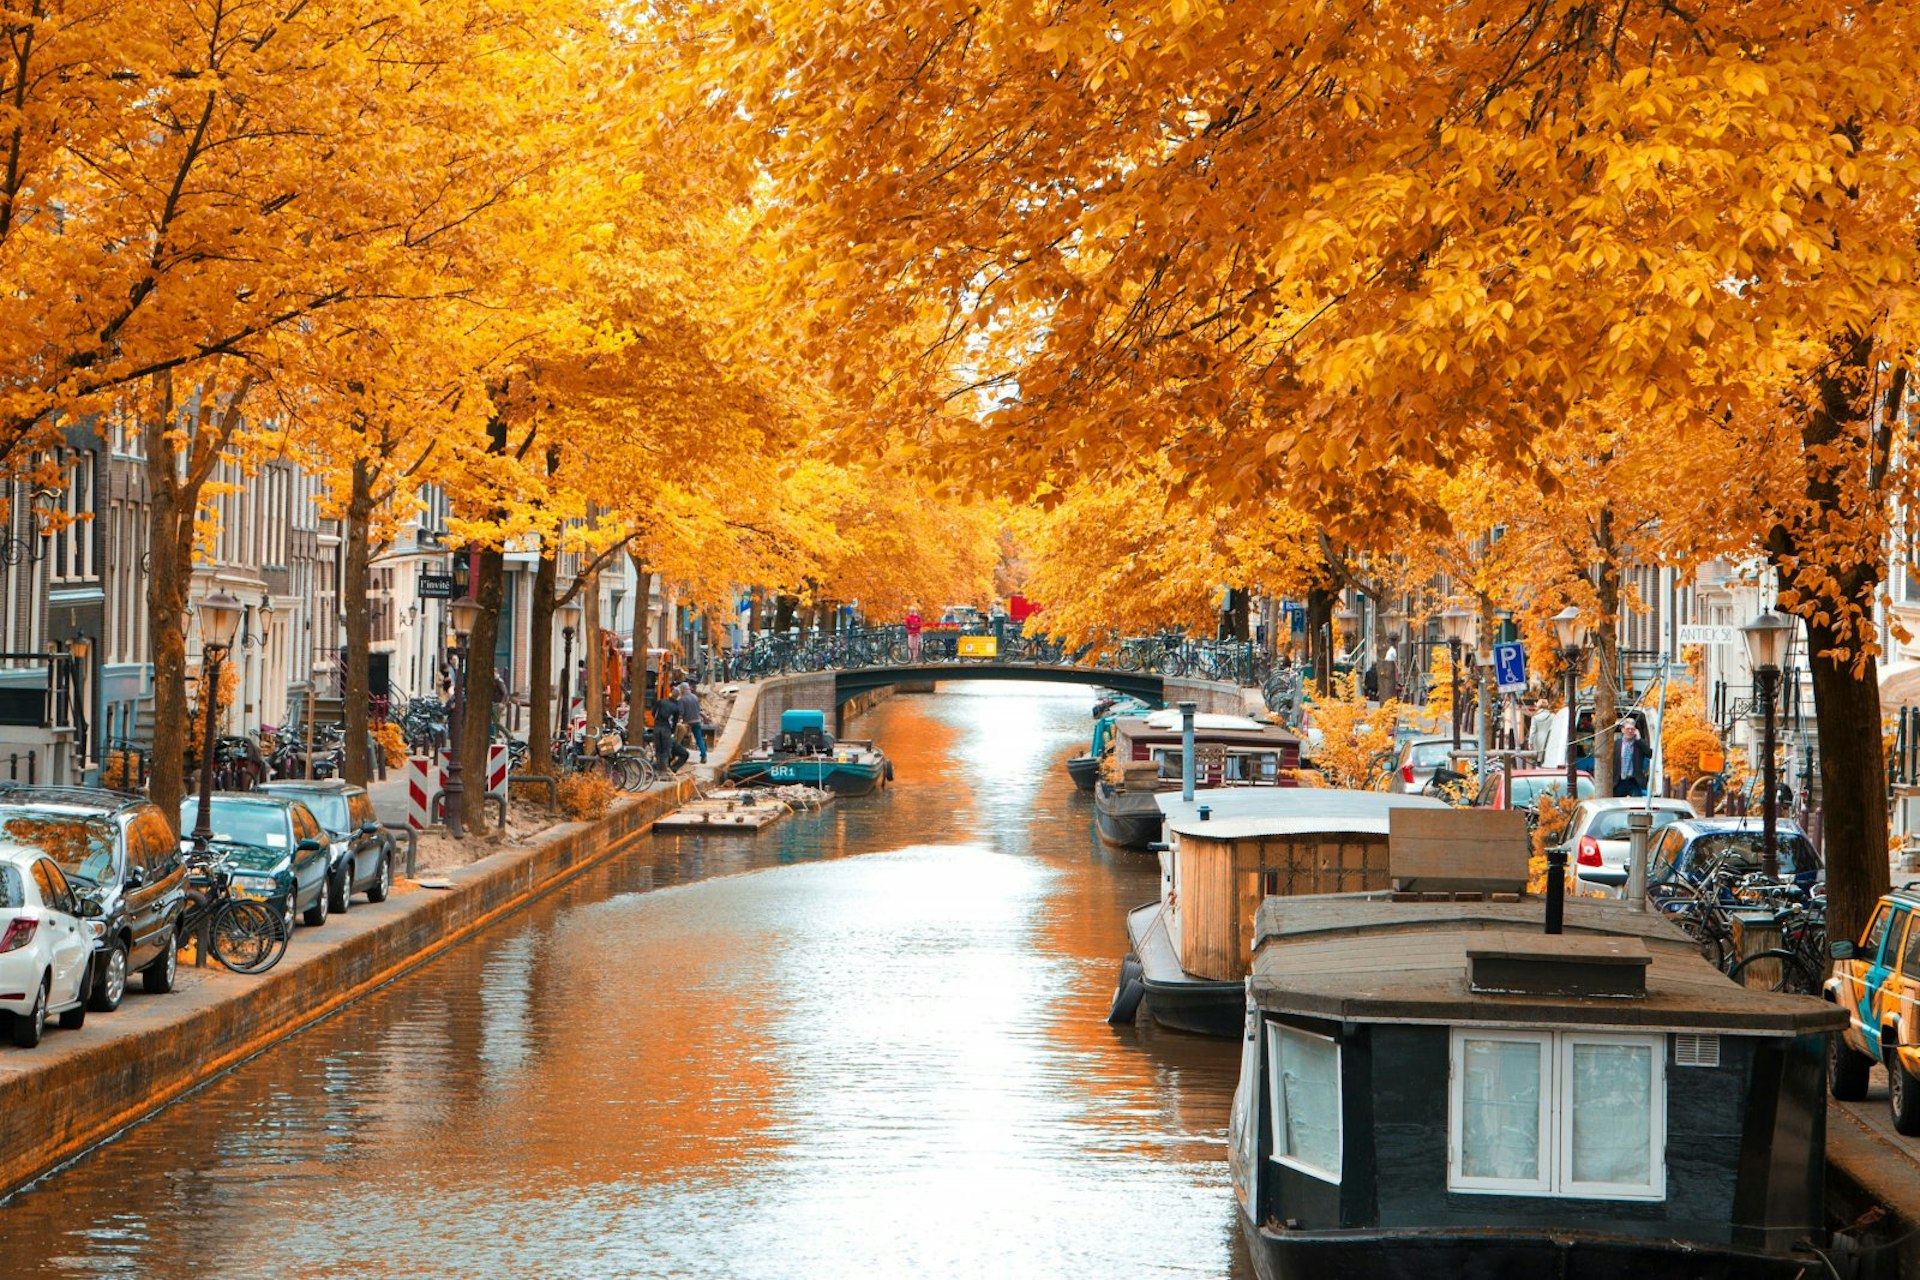 An Amsterdam canal in Autumn. The still water is shrouded by ochre- and russet-leaved trees. House boats line the side of the canal and on the street there are many cars and bicycles. 